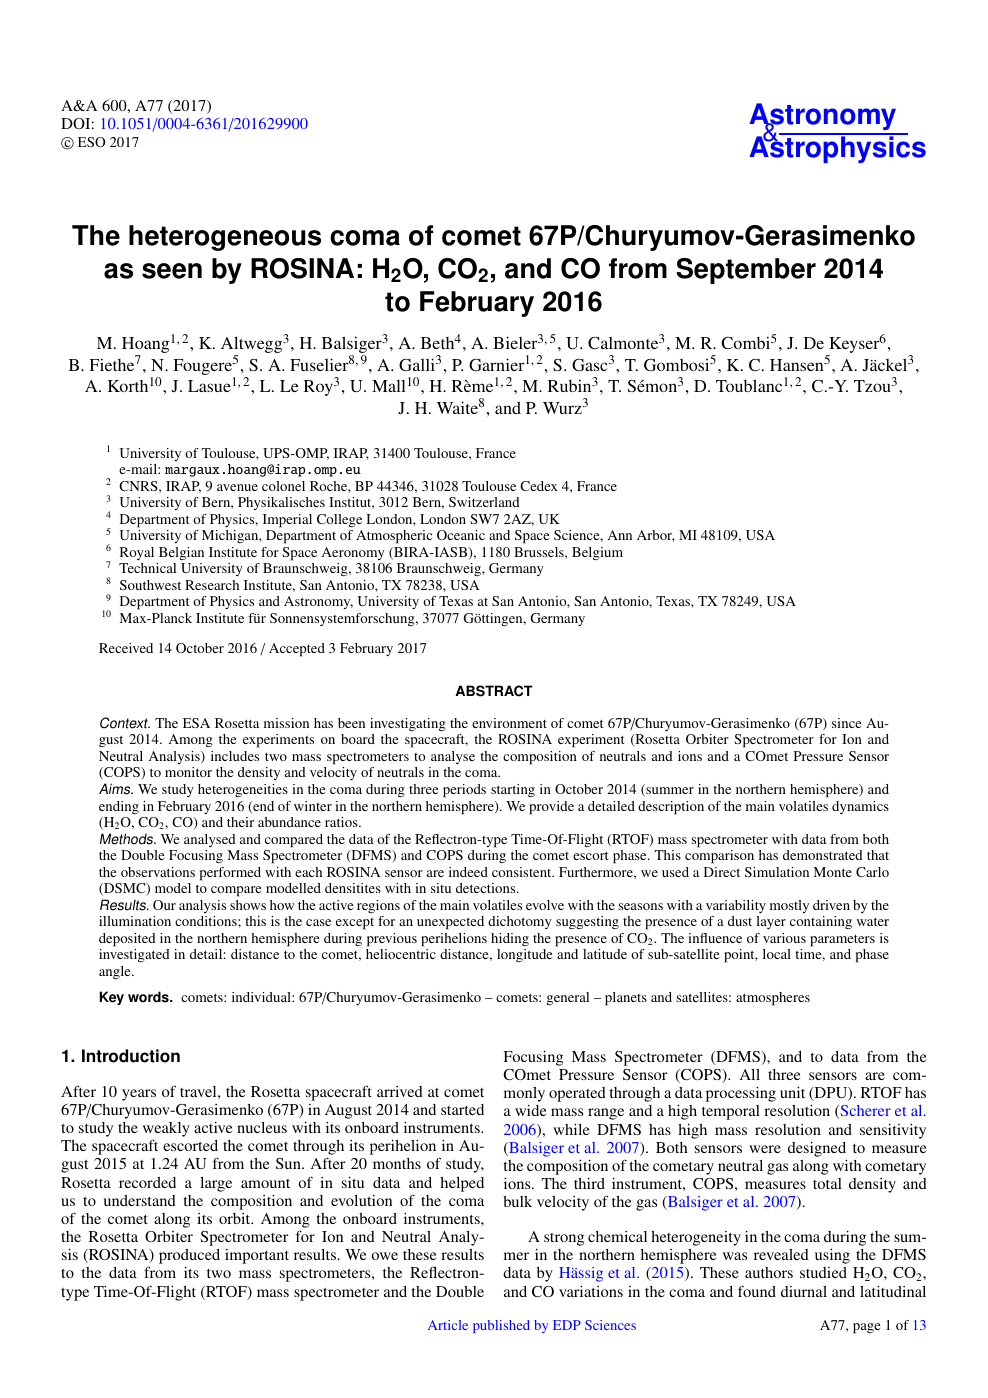 The Heterogeneous Coma Of Comet 67p Churyumov Gerasimenko As Seen By Rosina H2o Co2 And Co From September 14 To February 16 Topic Of Research Paper In Earth And Related Environmental Sciences Download